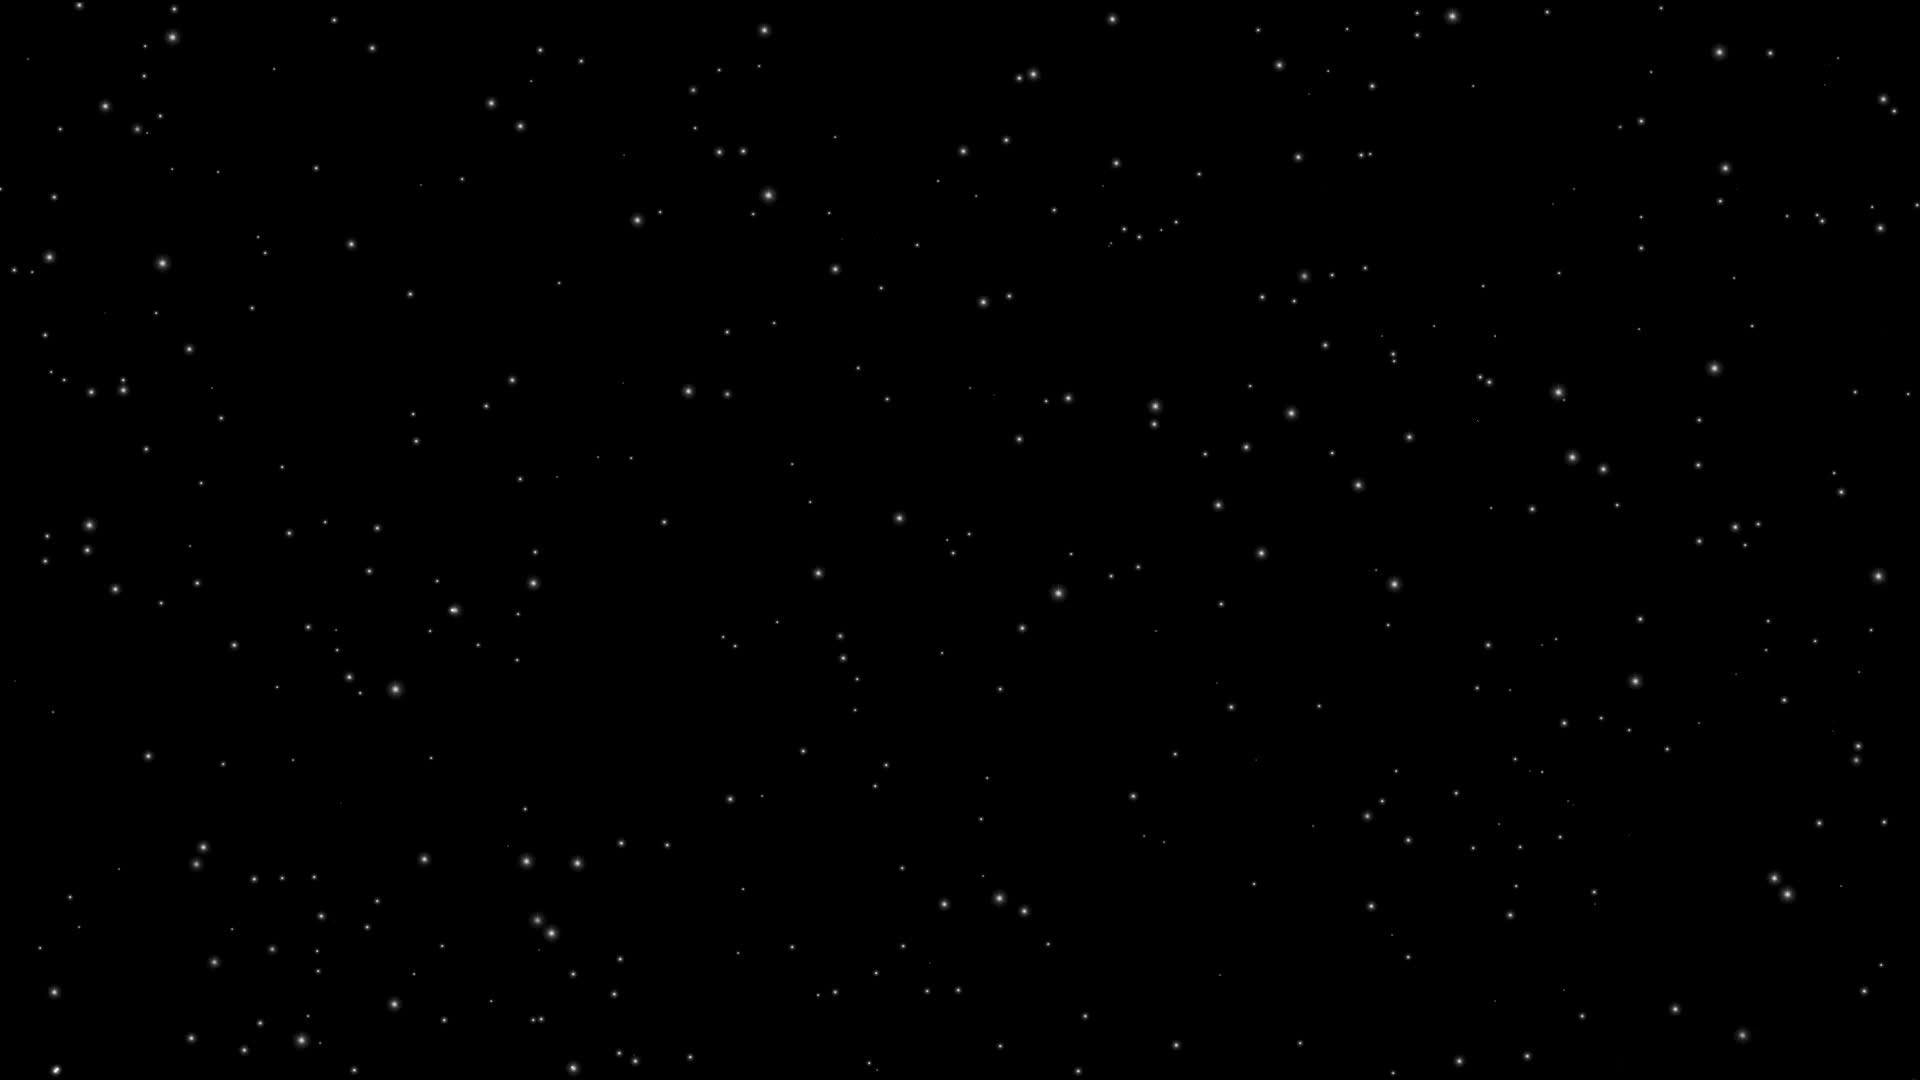 Buy aniimated night sky star on black background. Use for titles.